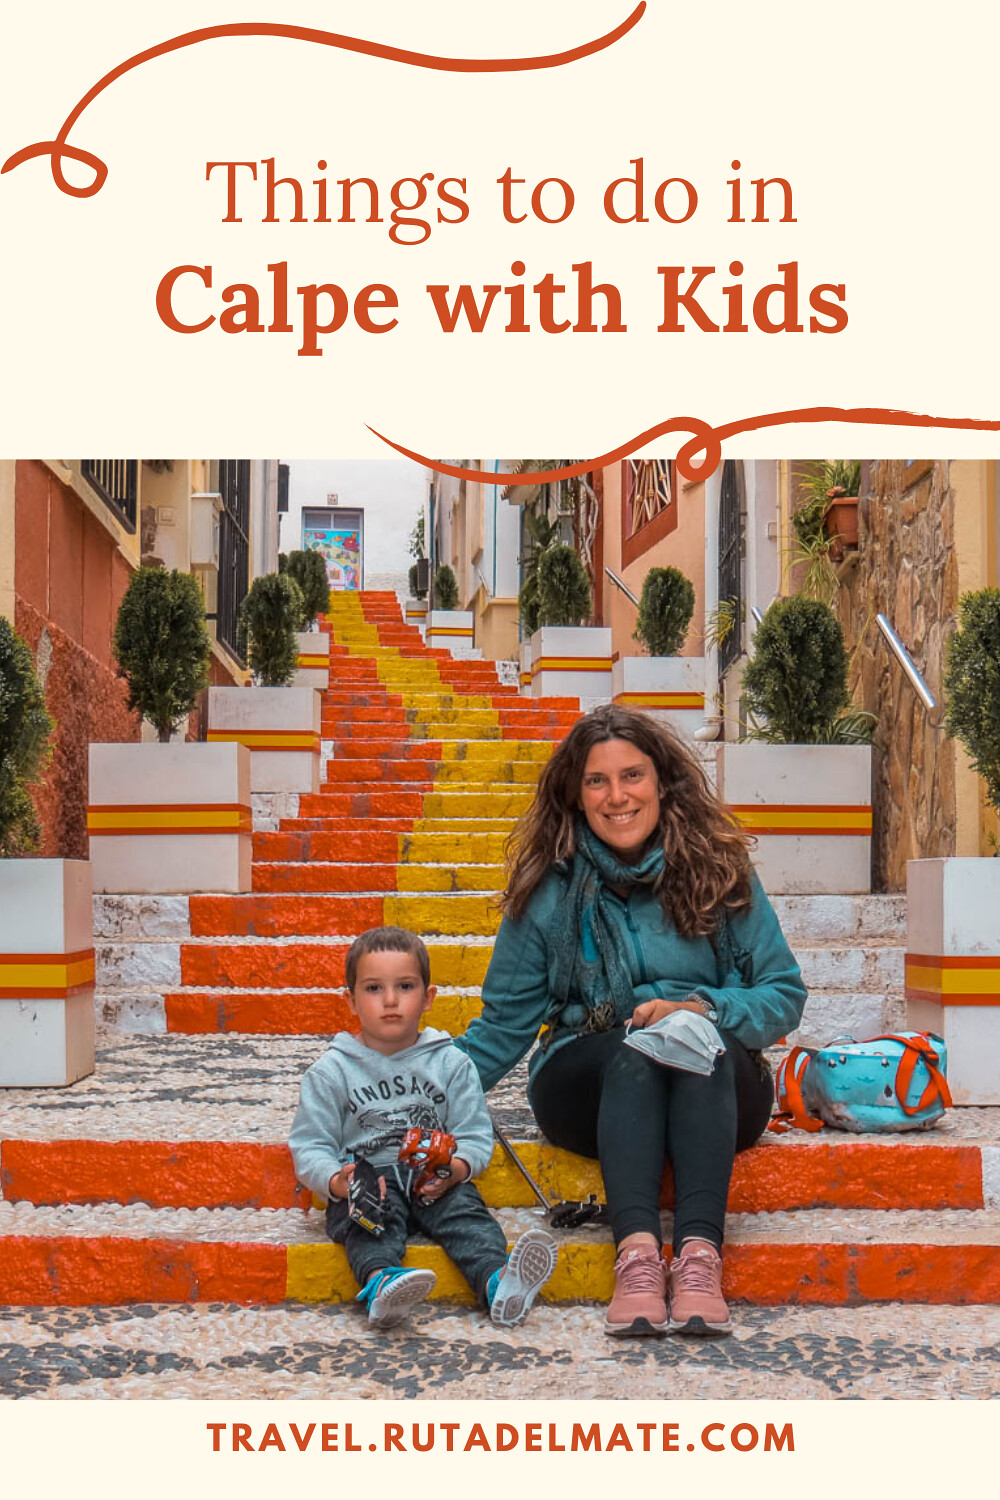 Things to do in Calpe with kids besides its Rock